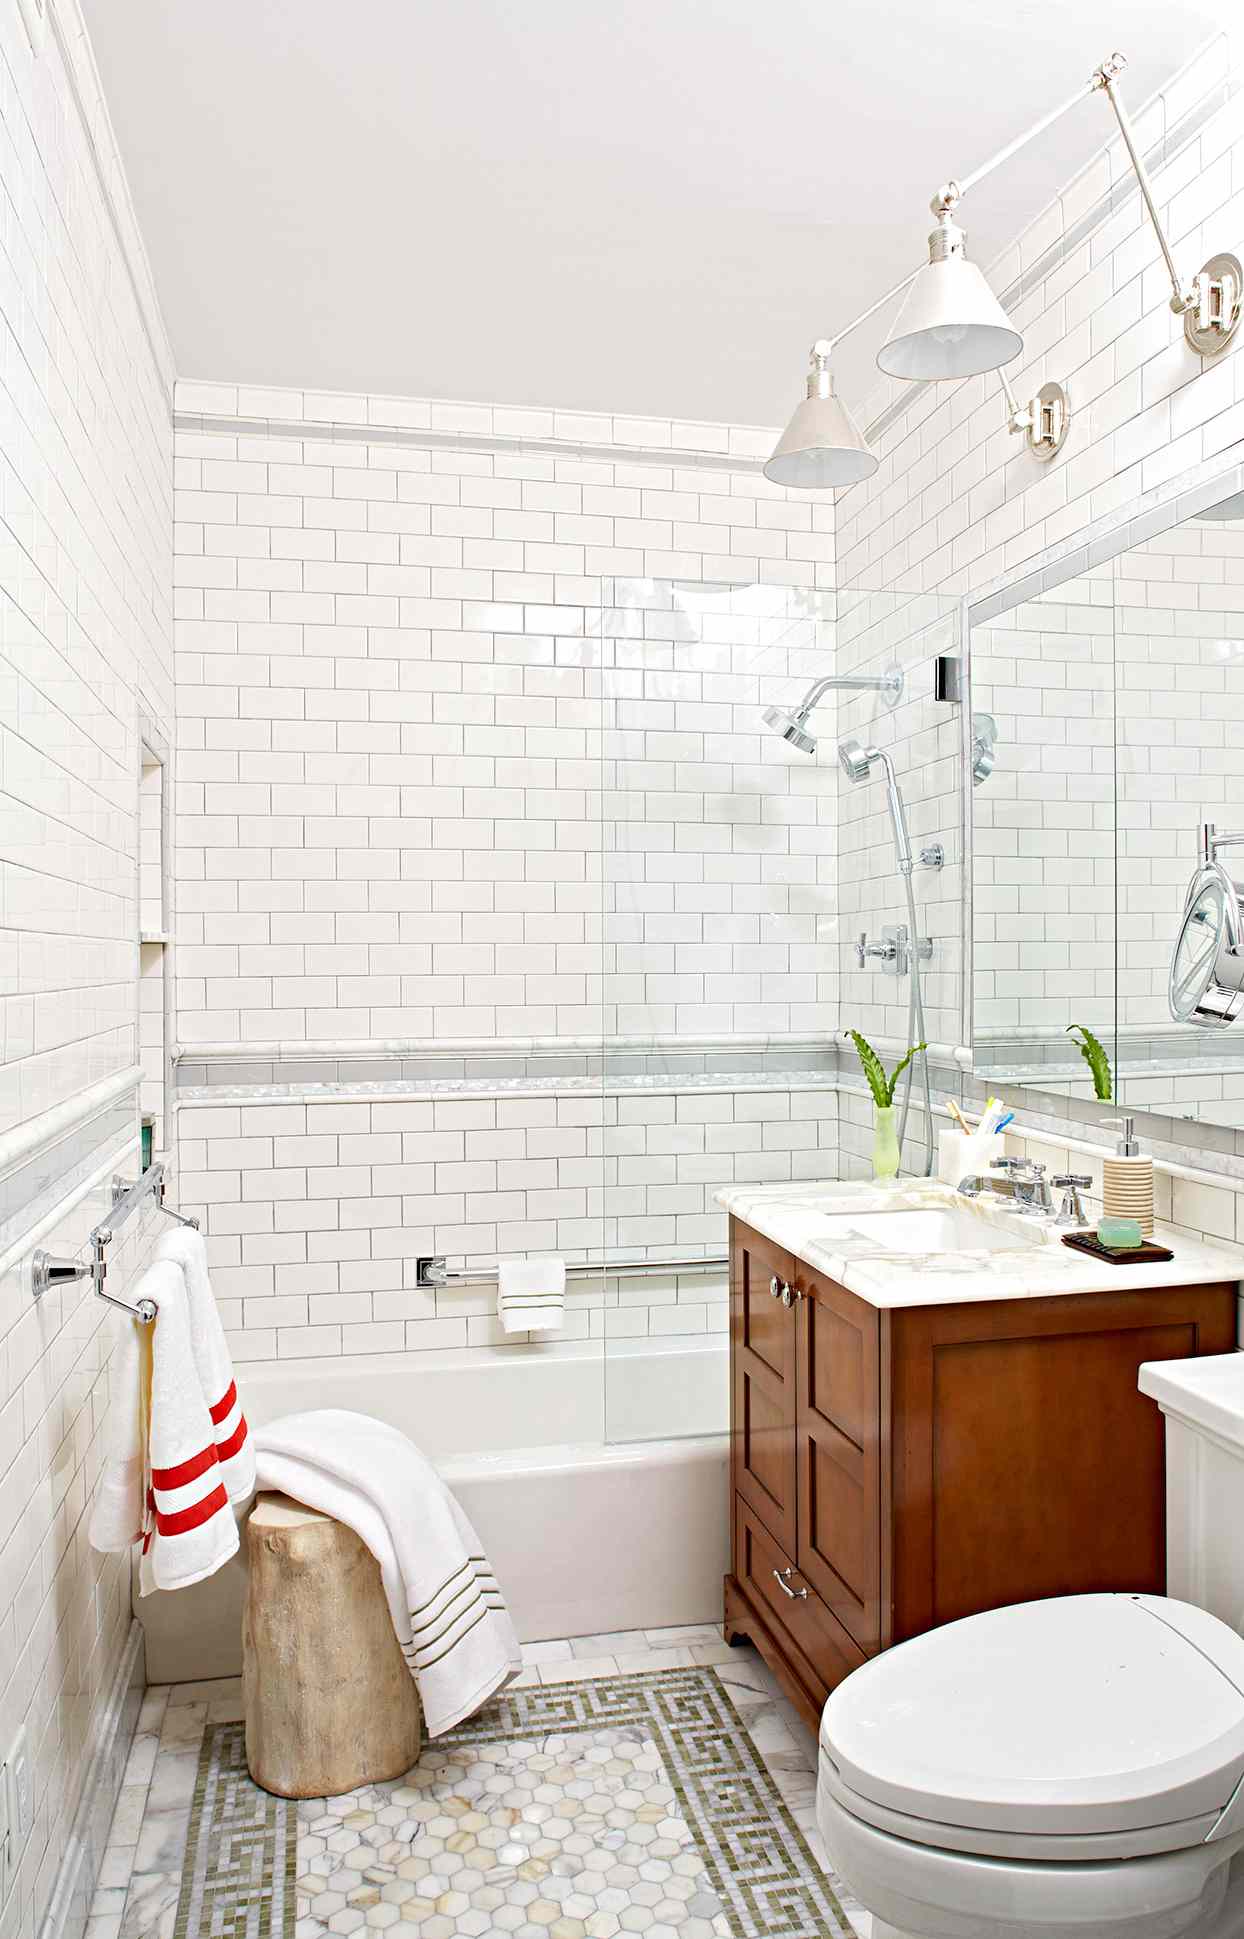 How to Tile a Shower Enclosure or Tub Surround | Better Homes & Gardens